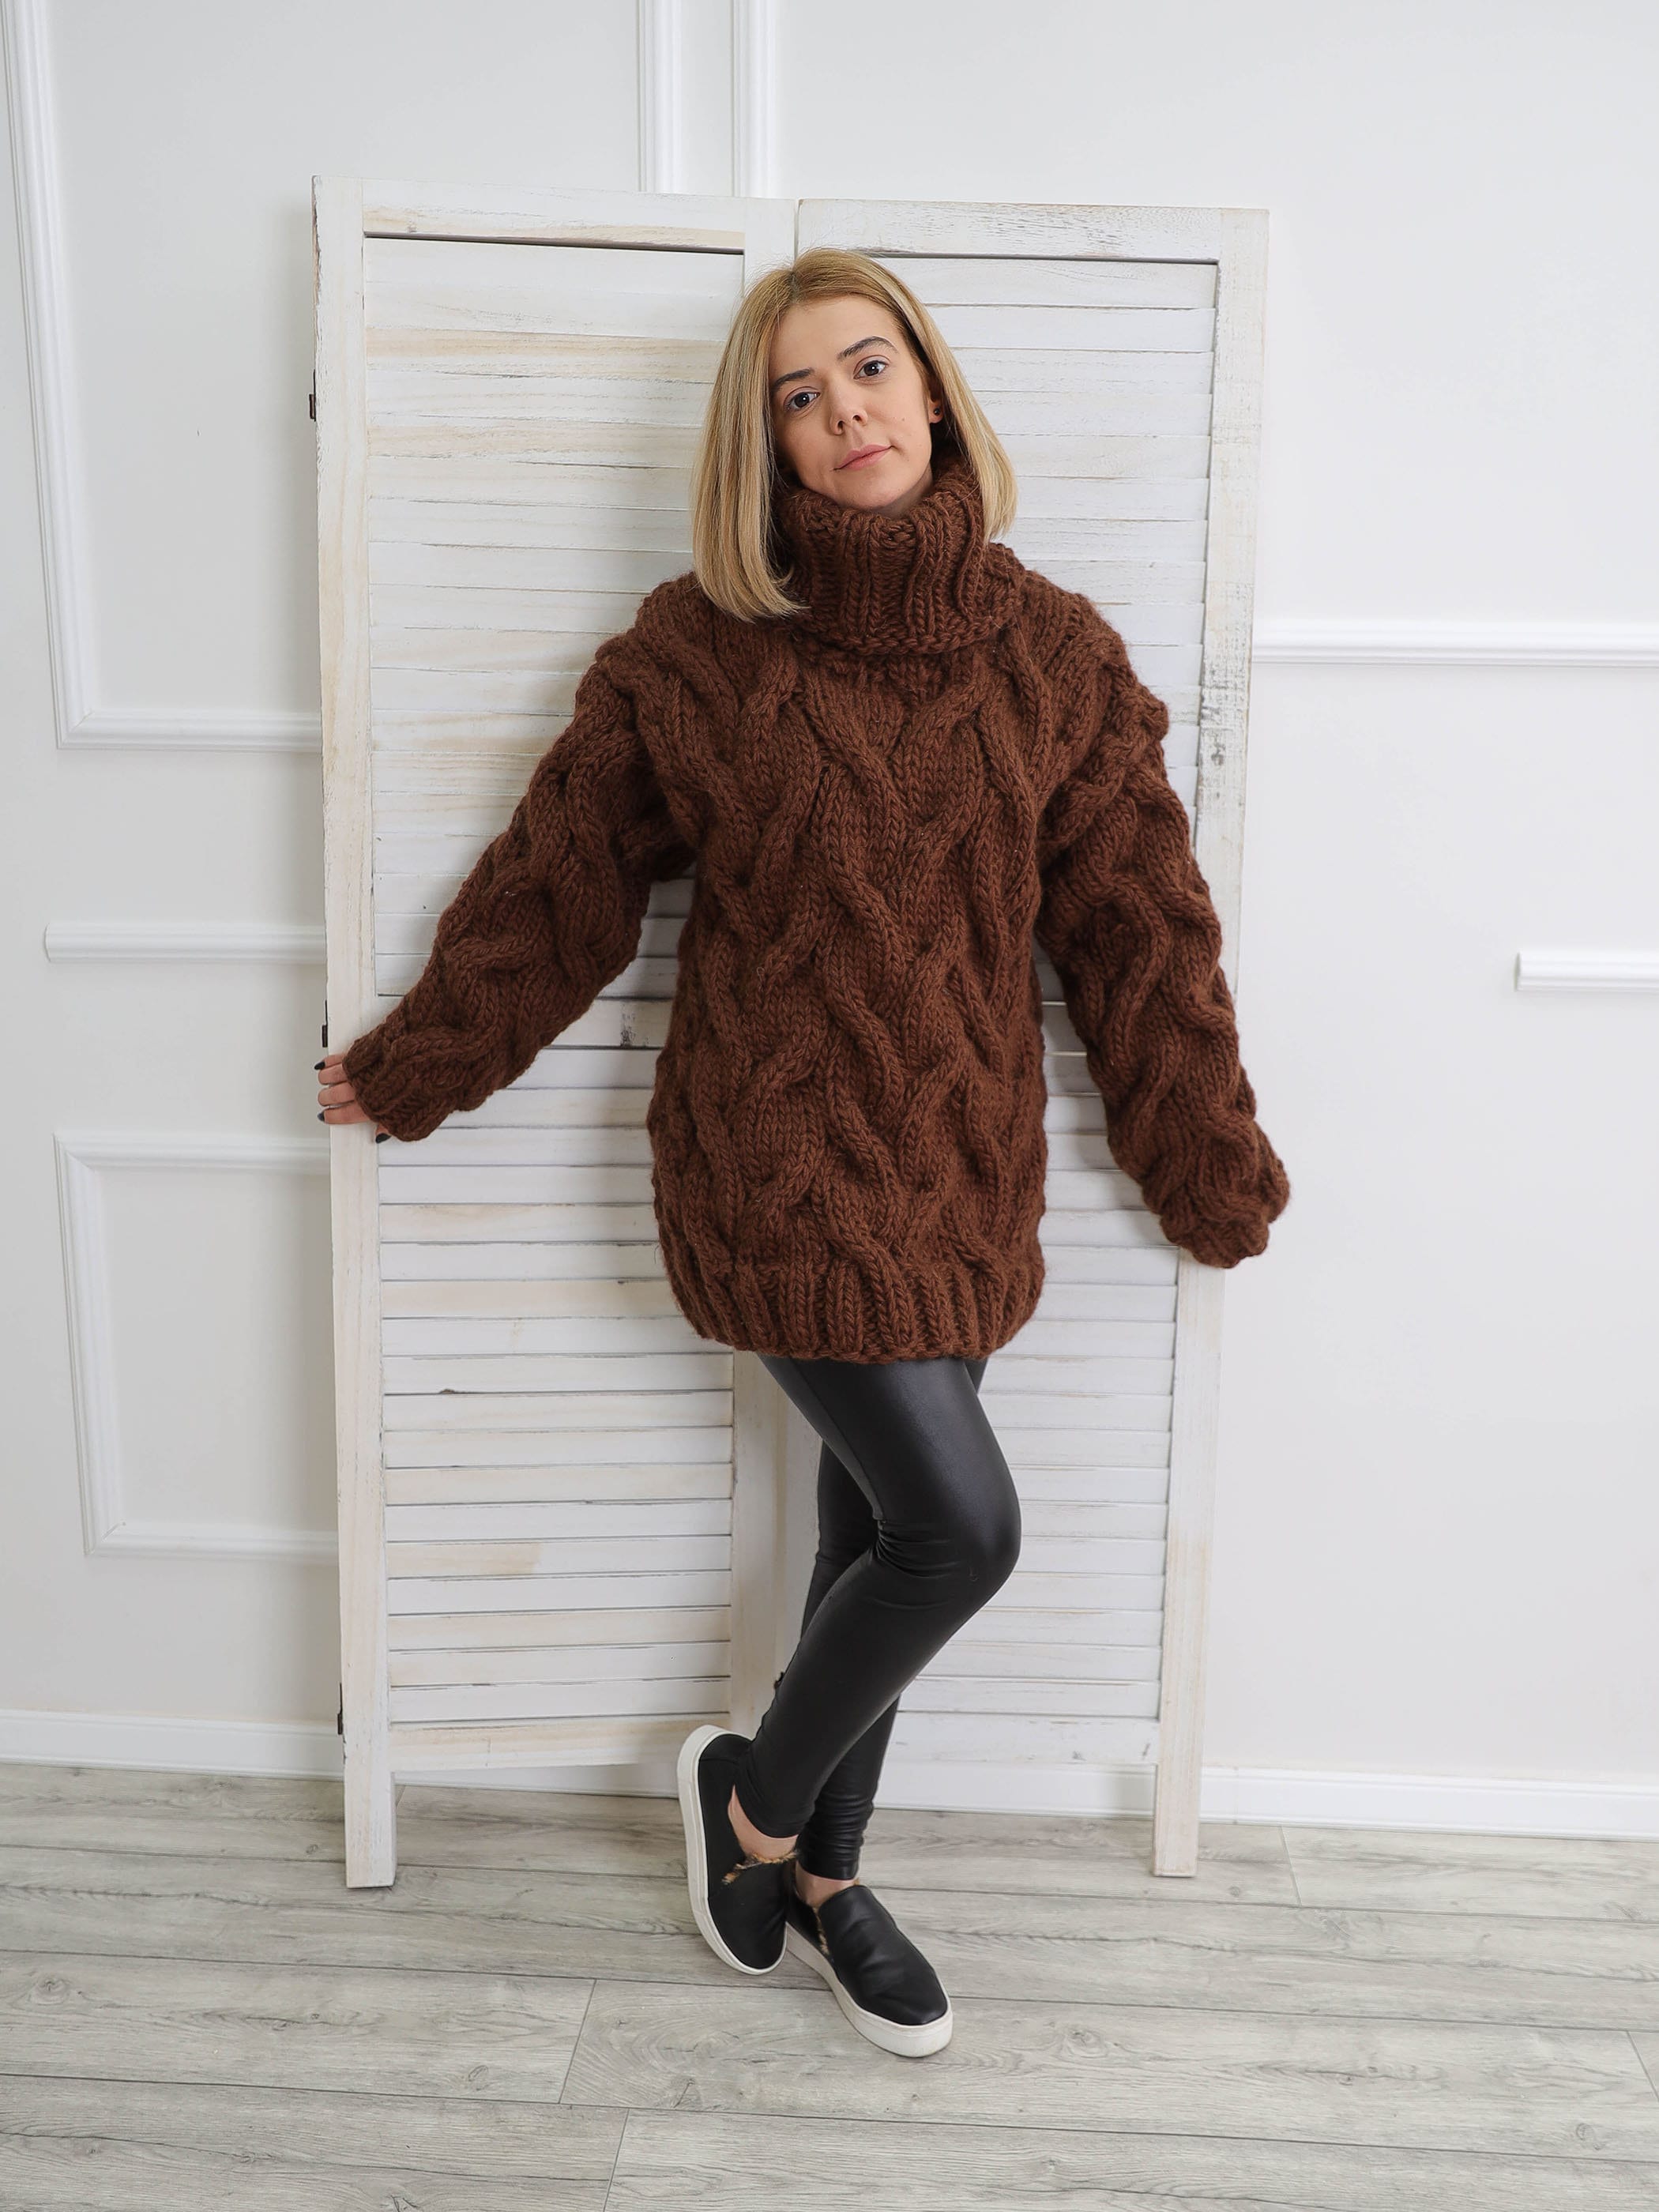 Turtleneck wool sweater Brown chunky jumper Knit pullover | Etsy